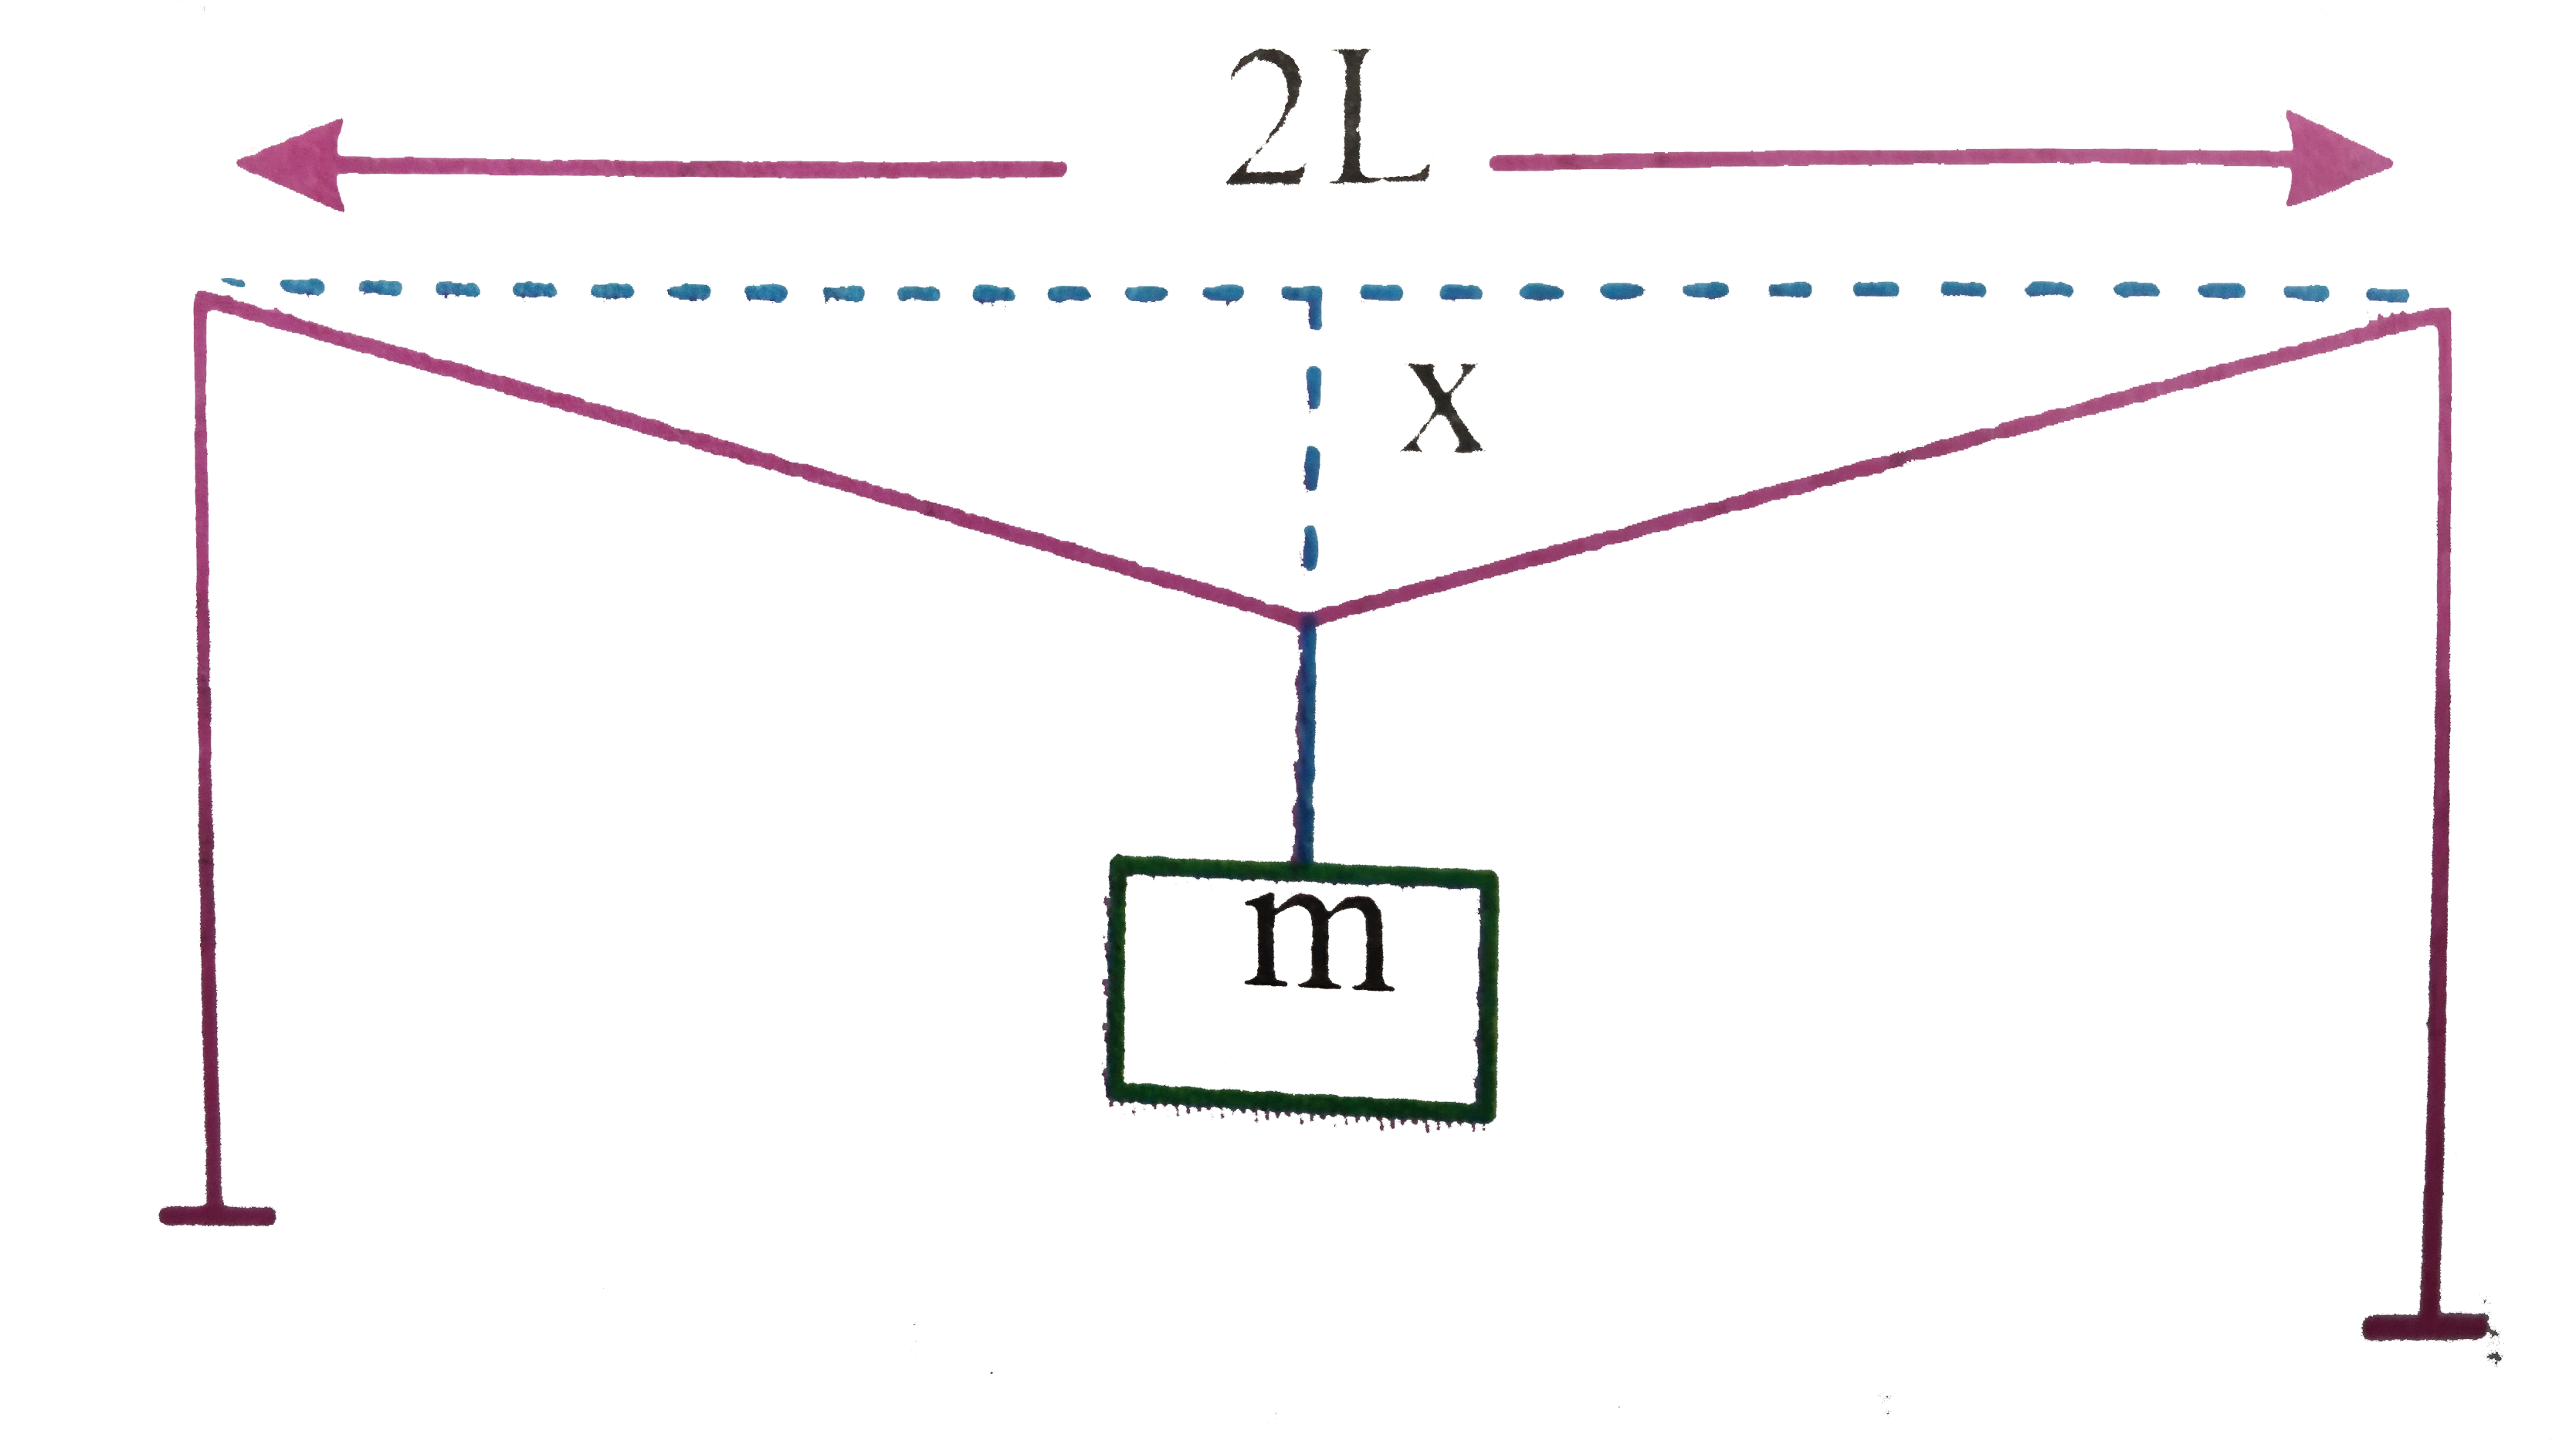 A mild steel wire of length 1.0m and cross sectional area 2L is strethched, within its elastic limit horizontally between  two pillars(figure). A mass of m is suspended form the midpont  of the wire. Strain in the wire is